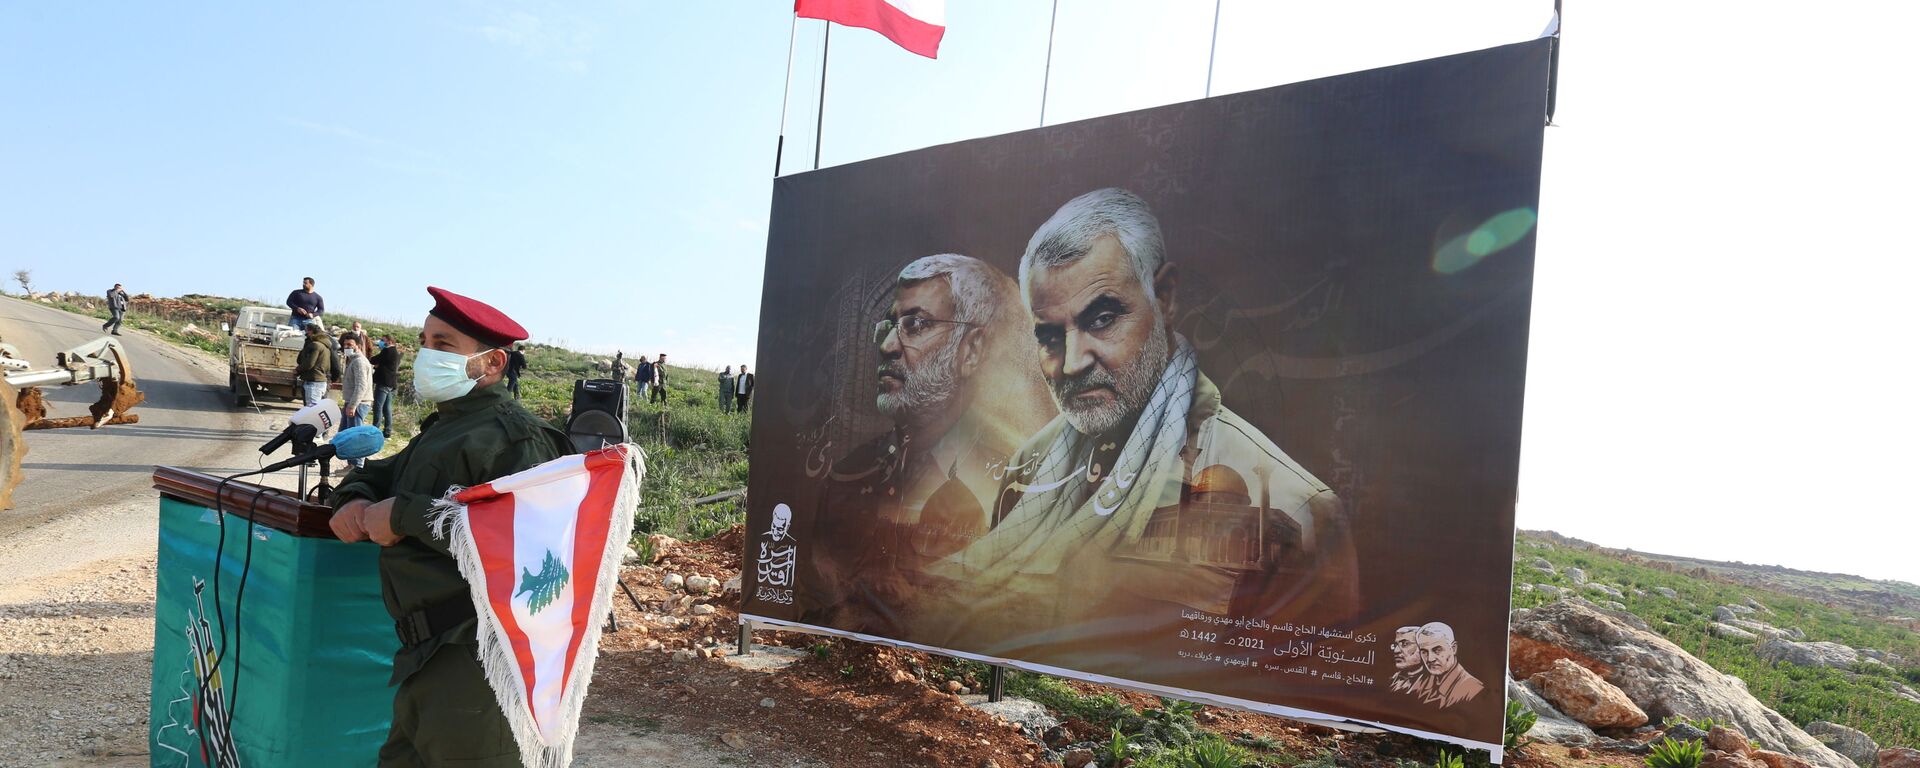 A member of Lebanon's Hezbollah holds a Lebanese flag as he stands in front of a picture depicting senior Iranian military commander General Qassem Soleimani and Iraqi militia commander Abu Mahdi al-Muhandis who were killed in a U.S. attack, during a ceremony marking the first anniversary of their killing, in the southern village of Khiam, Lebanon January 3, 2021. REUTERS/Aziz Taher - Sputnik International, 1920, 07.01.2022